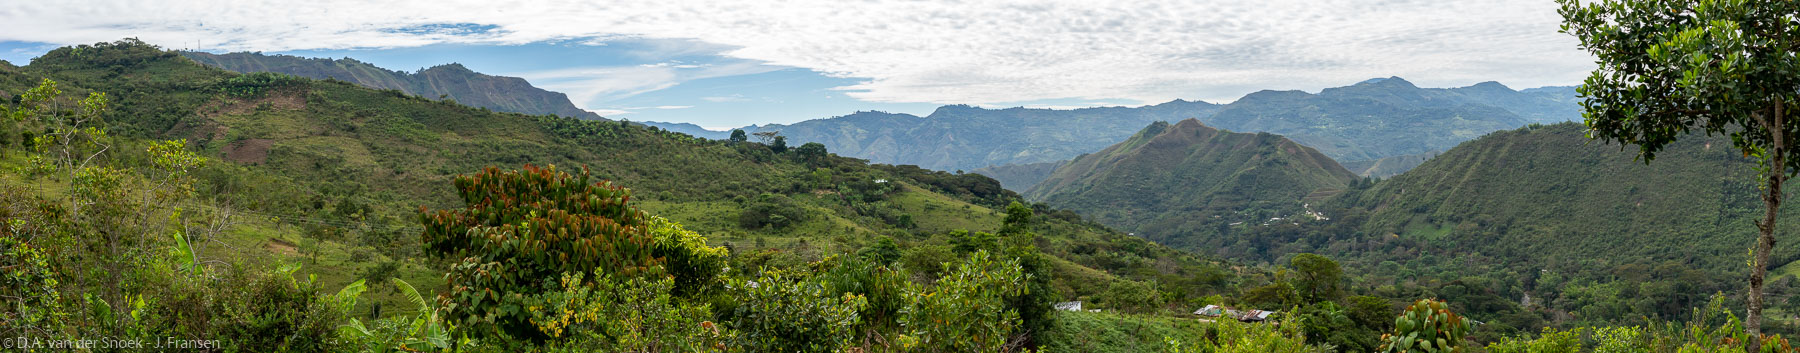 Colombia-0506-Pano.jpg